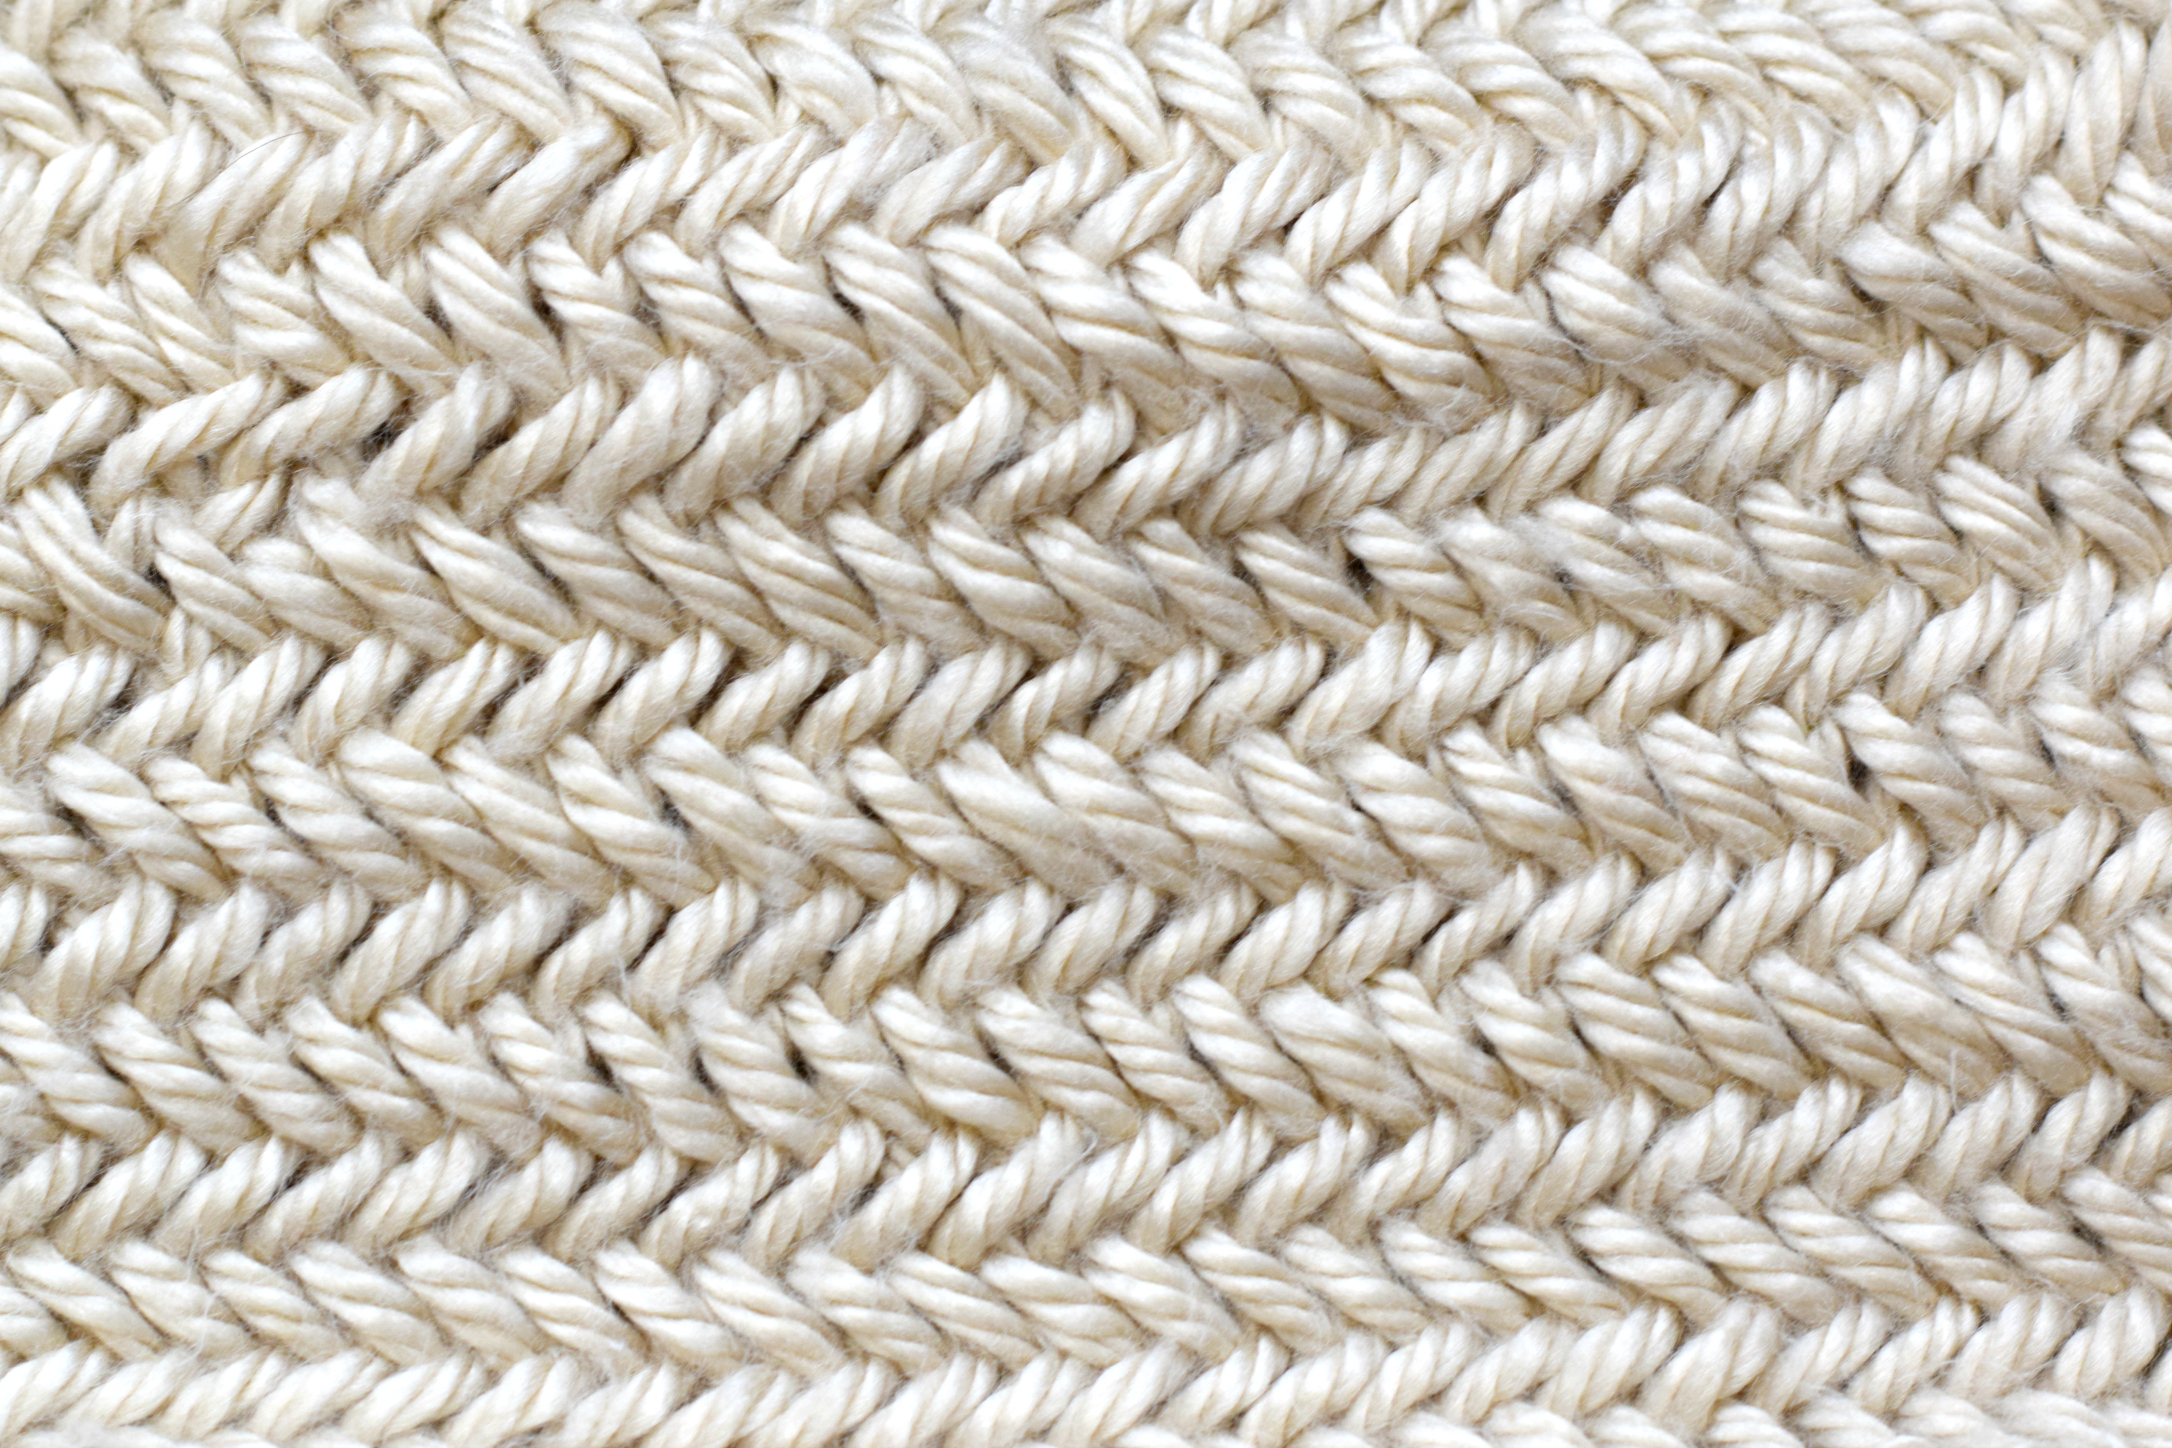 Basic Eyelet Stitch Knitting Pattern: Easy How To for Beginners